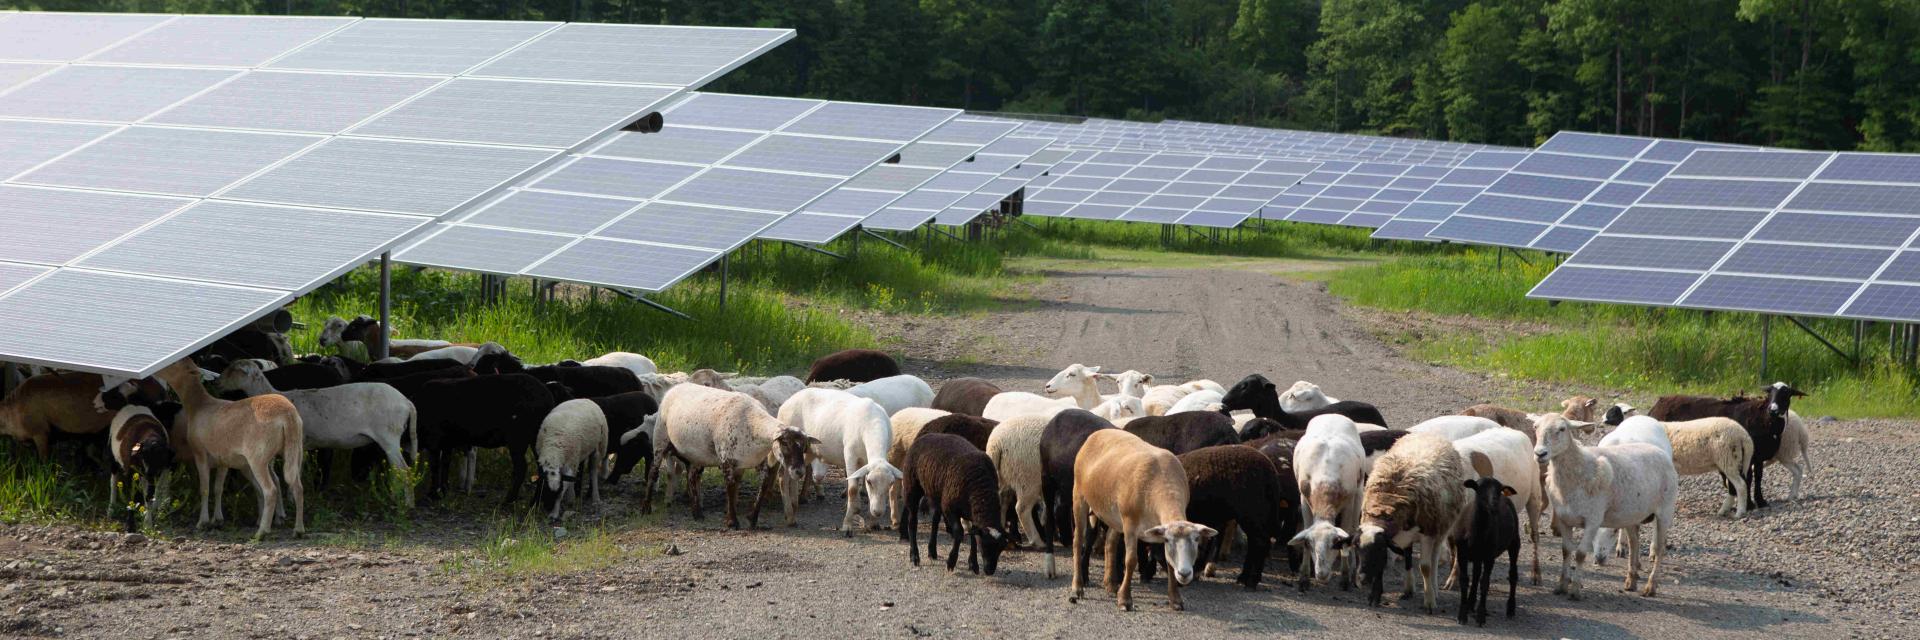 Sheep grazing and using solar panels for shade on an agrivoltaic farm. 